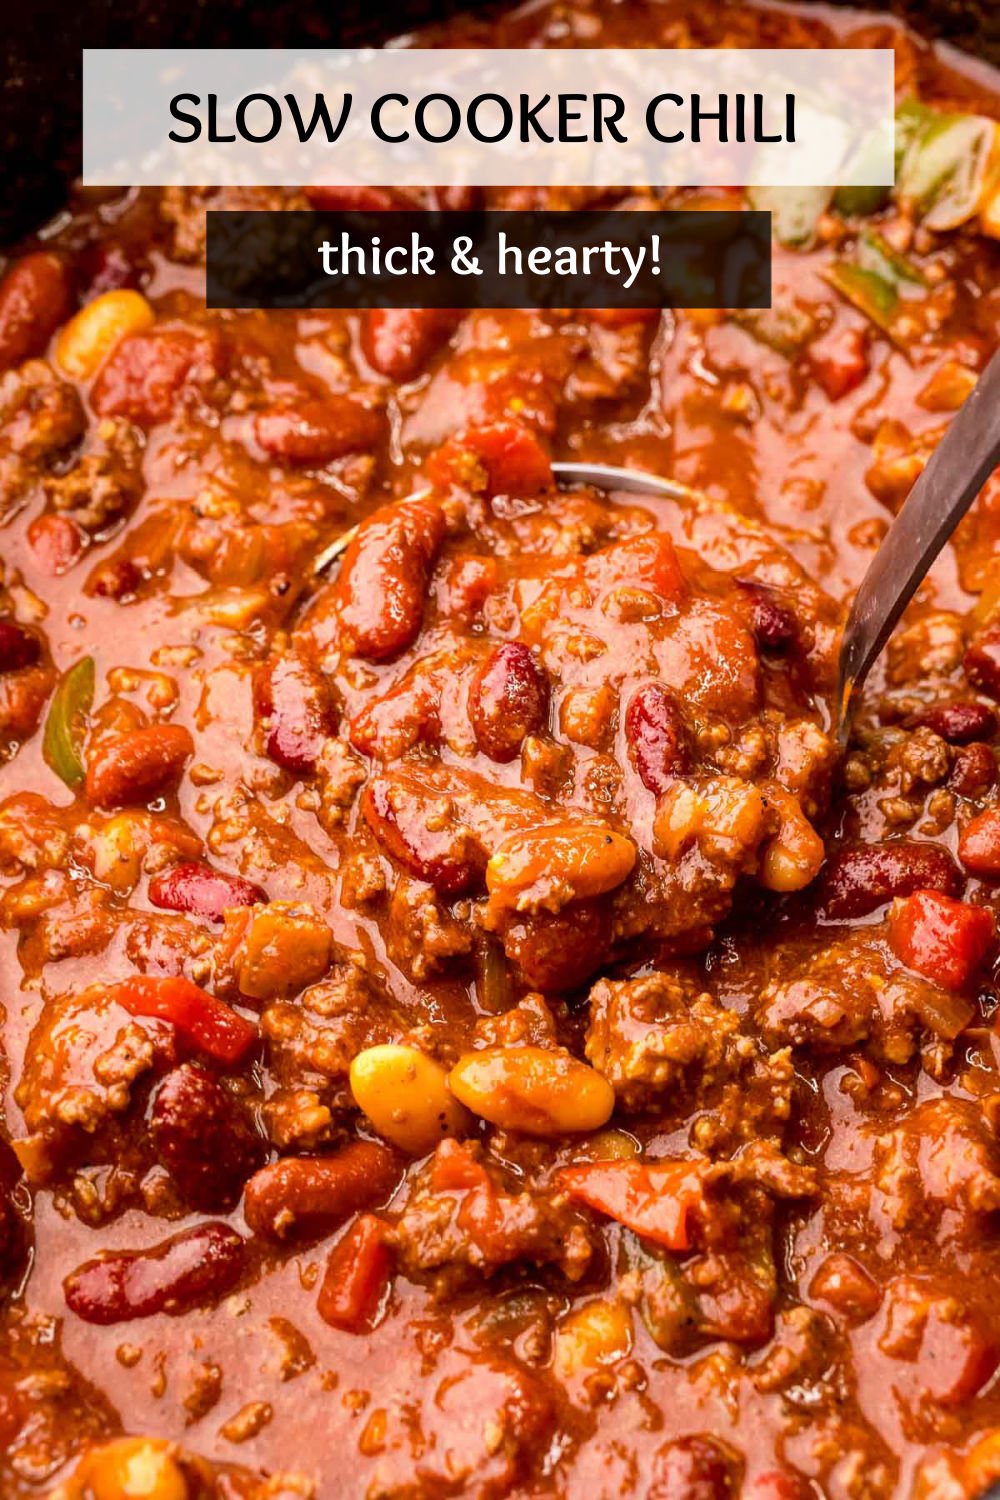 This thick and hearty classic slow cooker chili recipe is filling, easy, and full of flavor. Cooked slowly in the crockpot and then loaded with your favorite toppings, this meal makes everyone happy! | www.persnicketyplates.com